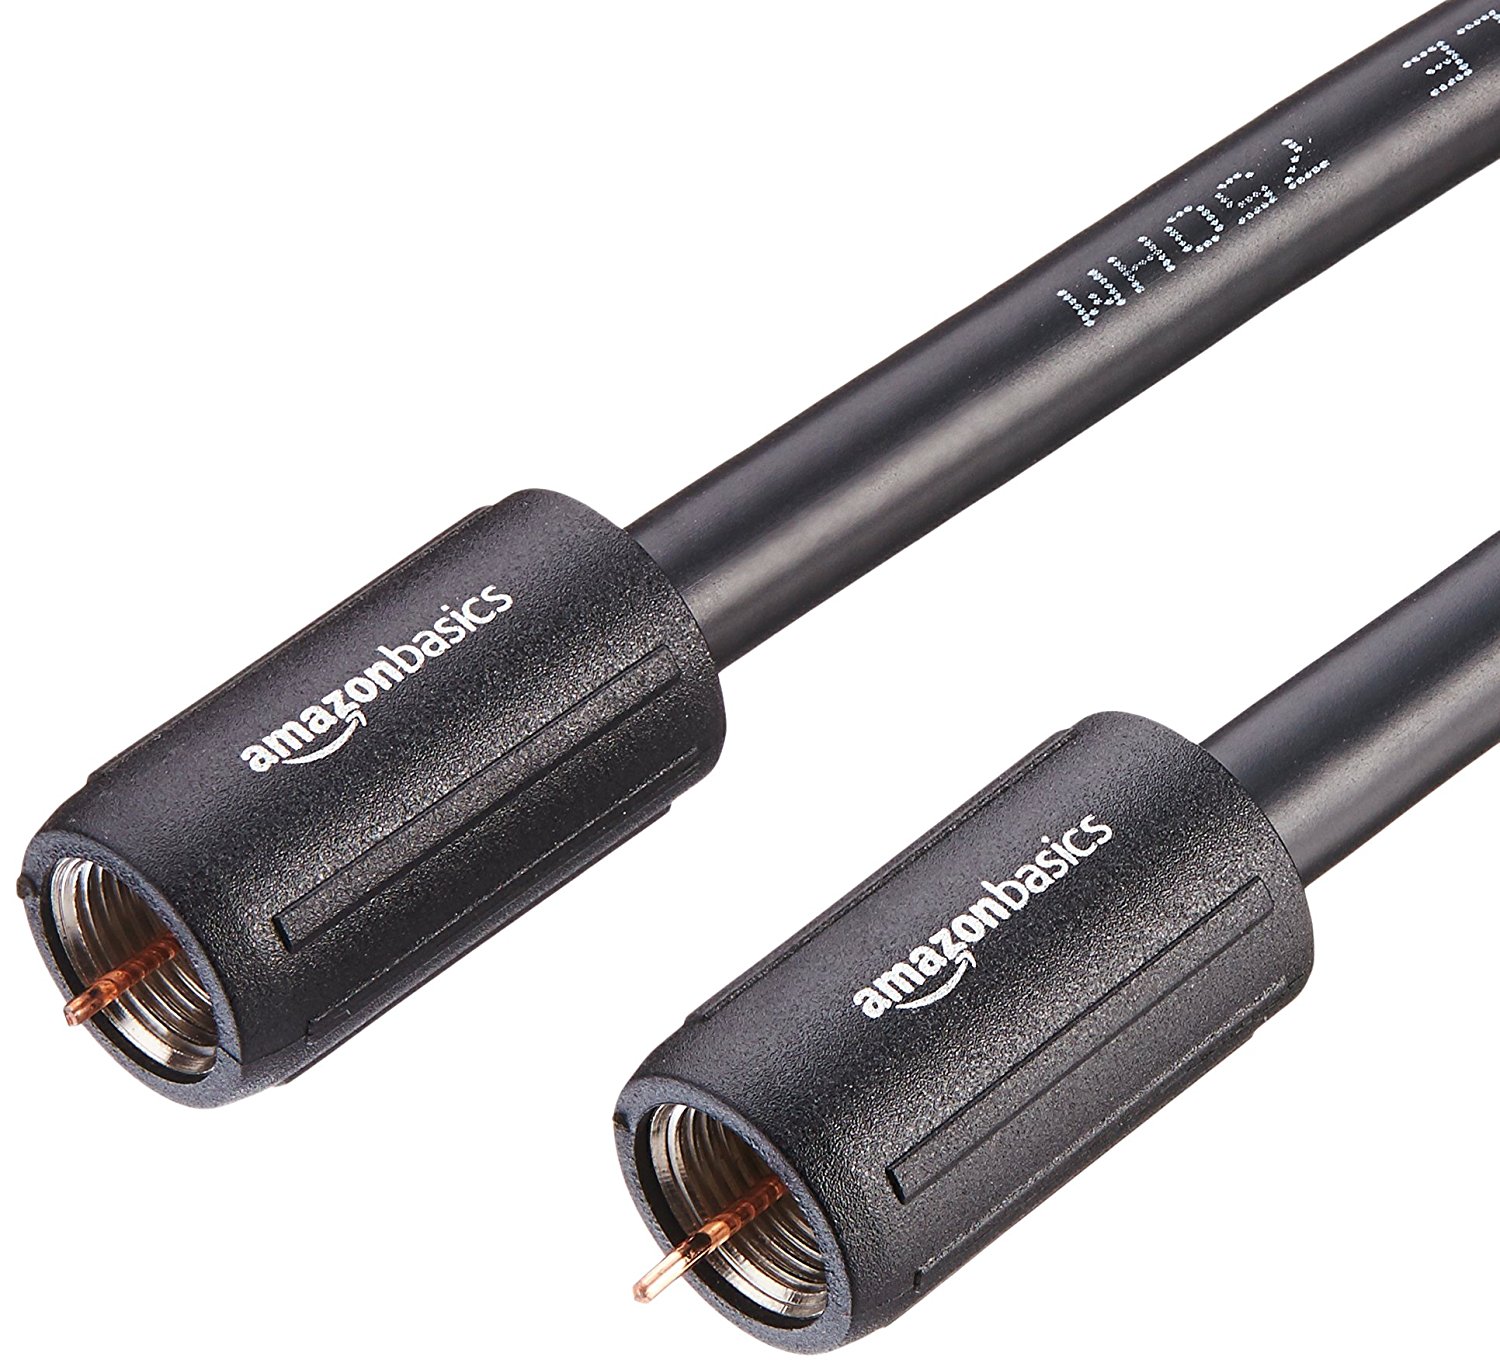 Amazon: Buy AmazonBasics CL2-Rated Coaxial Cable 4 feet at Rs 195 only